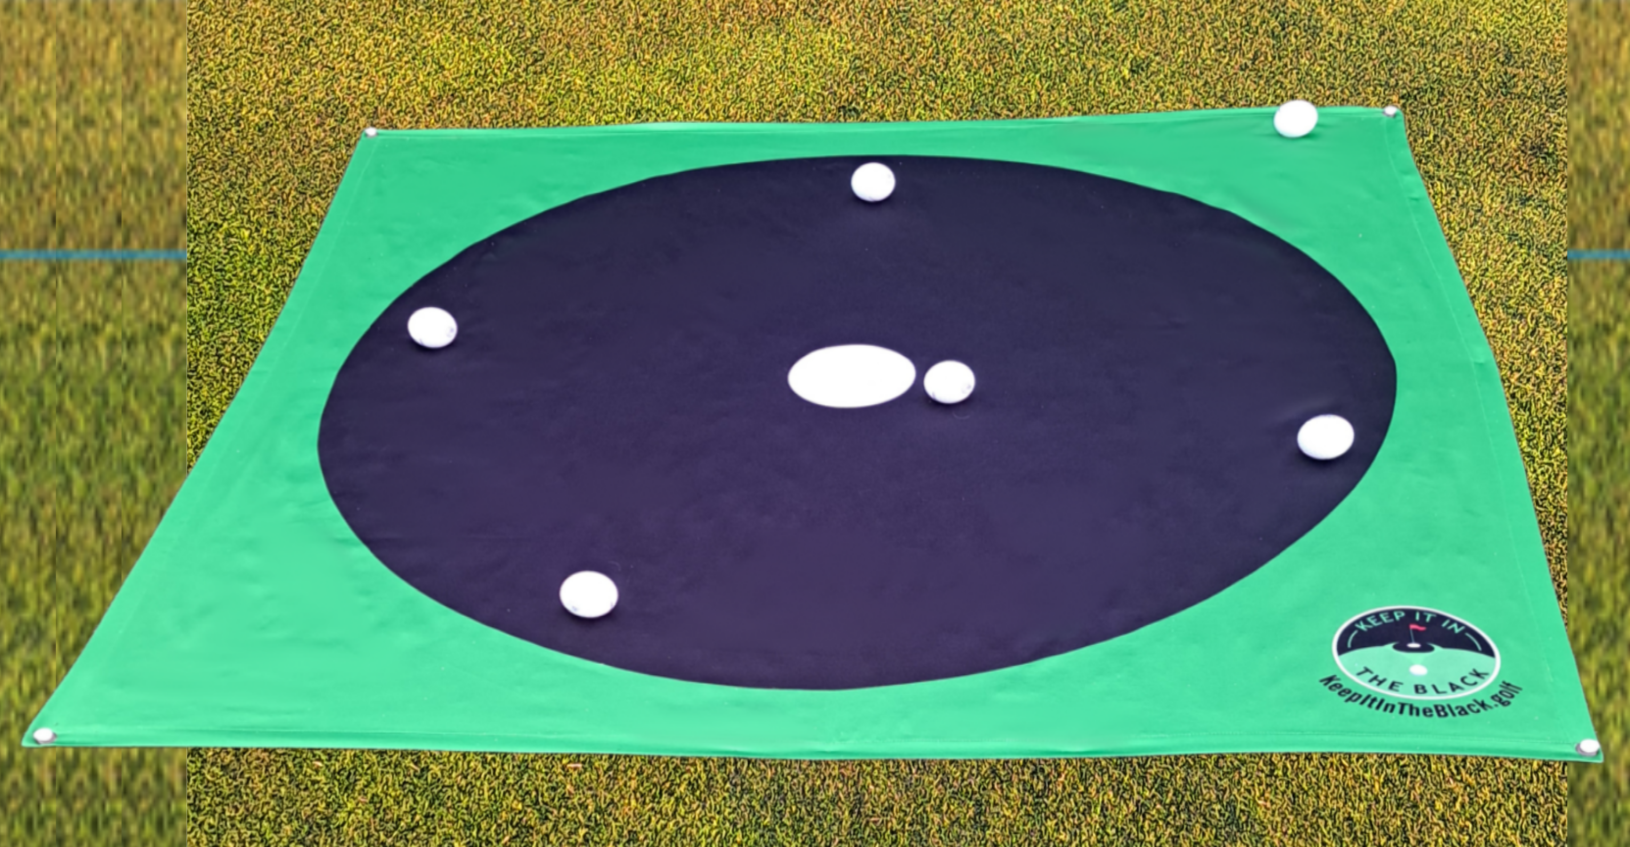 A new and revolutionary patented golf training aid to improve your putting and chipping and reduce your number of 3 putts!